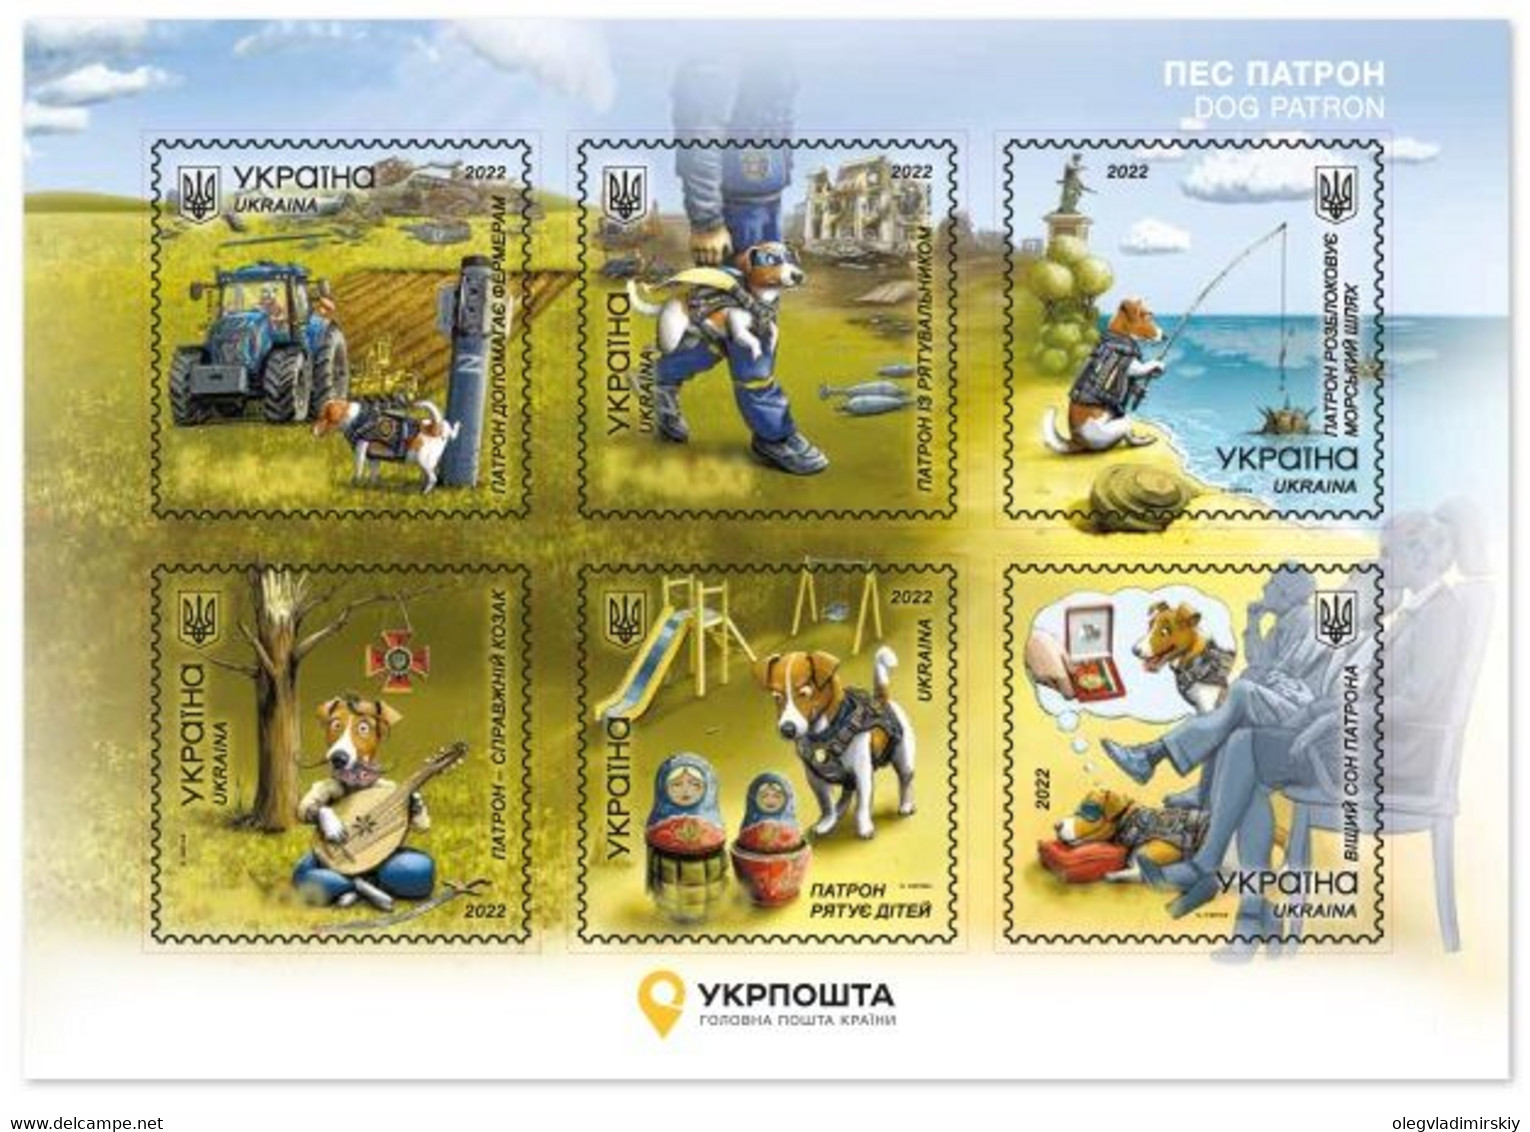 Ukraine 2022 The Famous Sapper Dog Patron - Army Assistant Postal Charity Issue Set Of 6 Non-postage Stamps In A Block - Muñecas